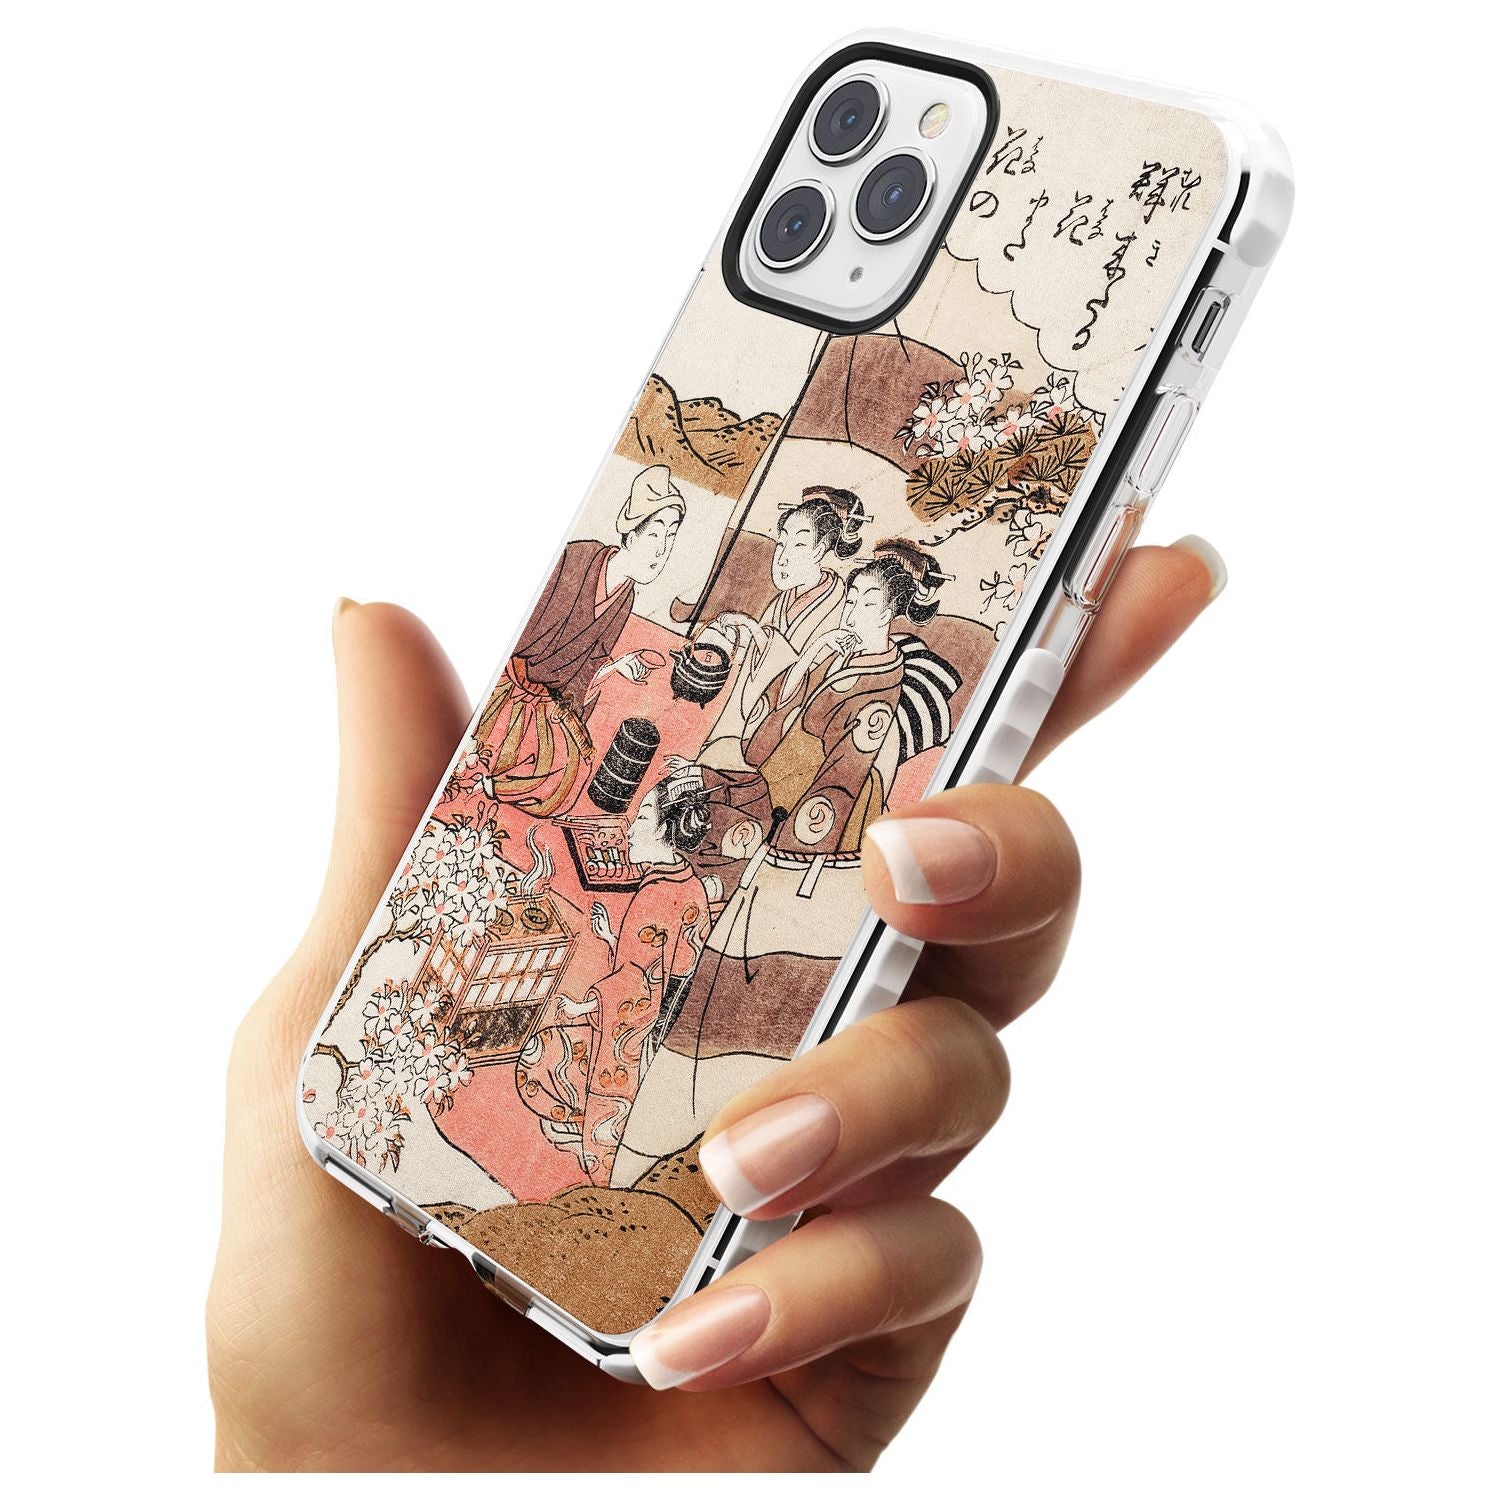 Japanese Afternoon Tea Impact Phone Case for iPhone 11 Pro Max